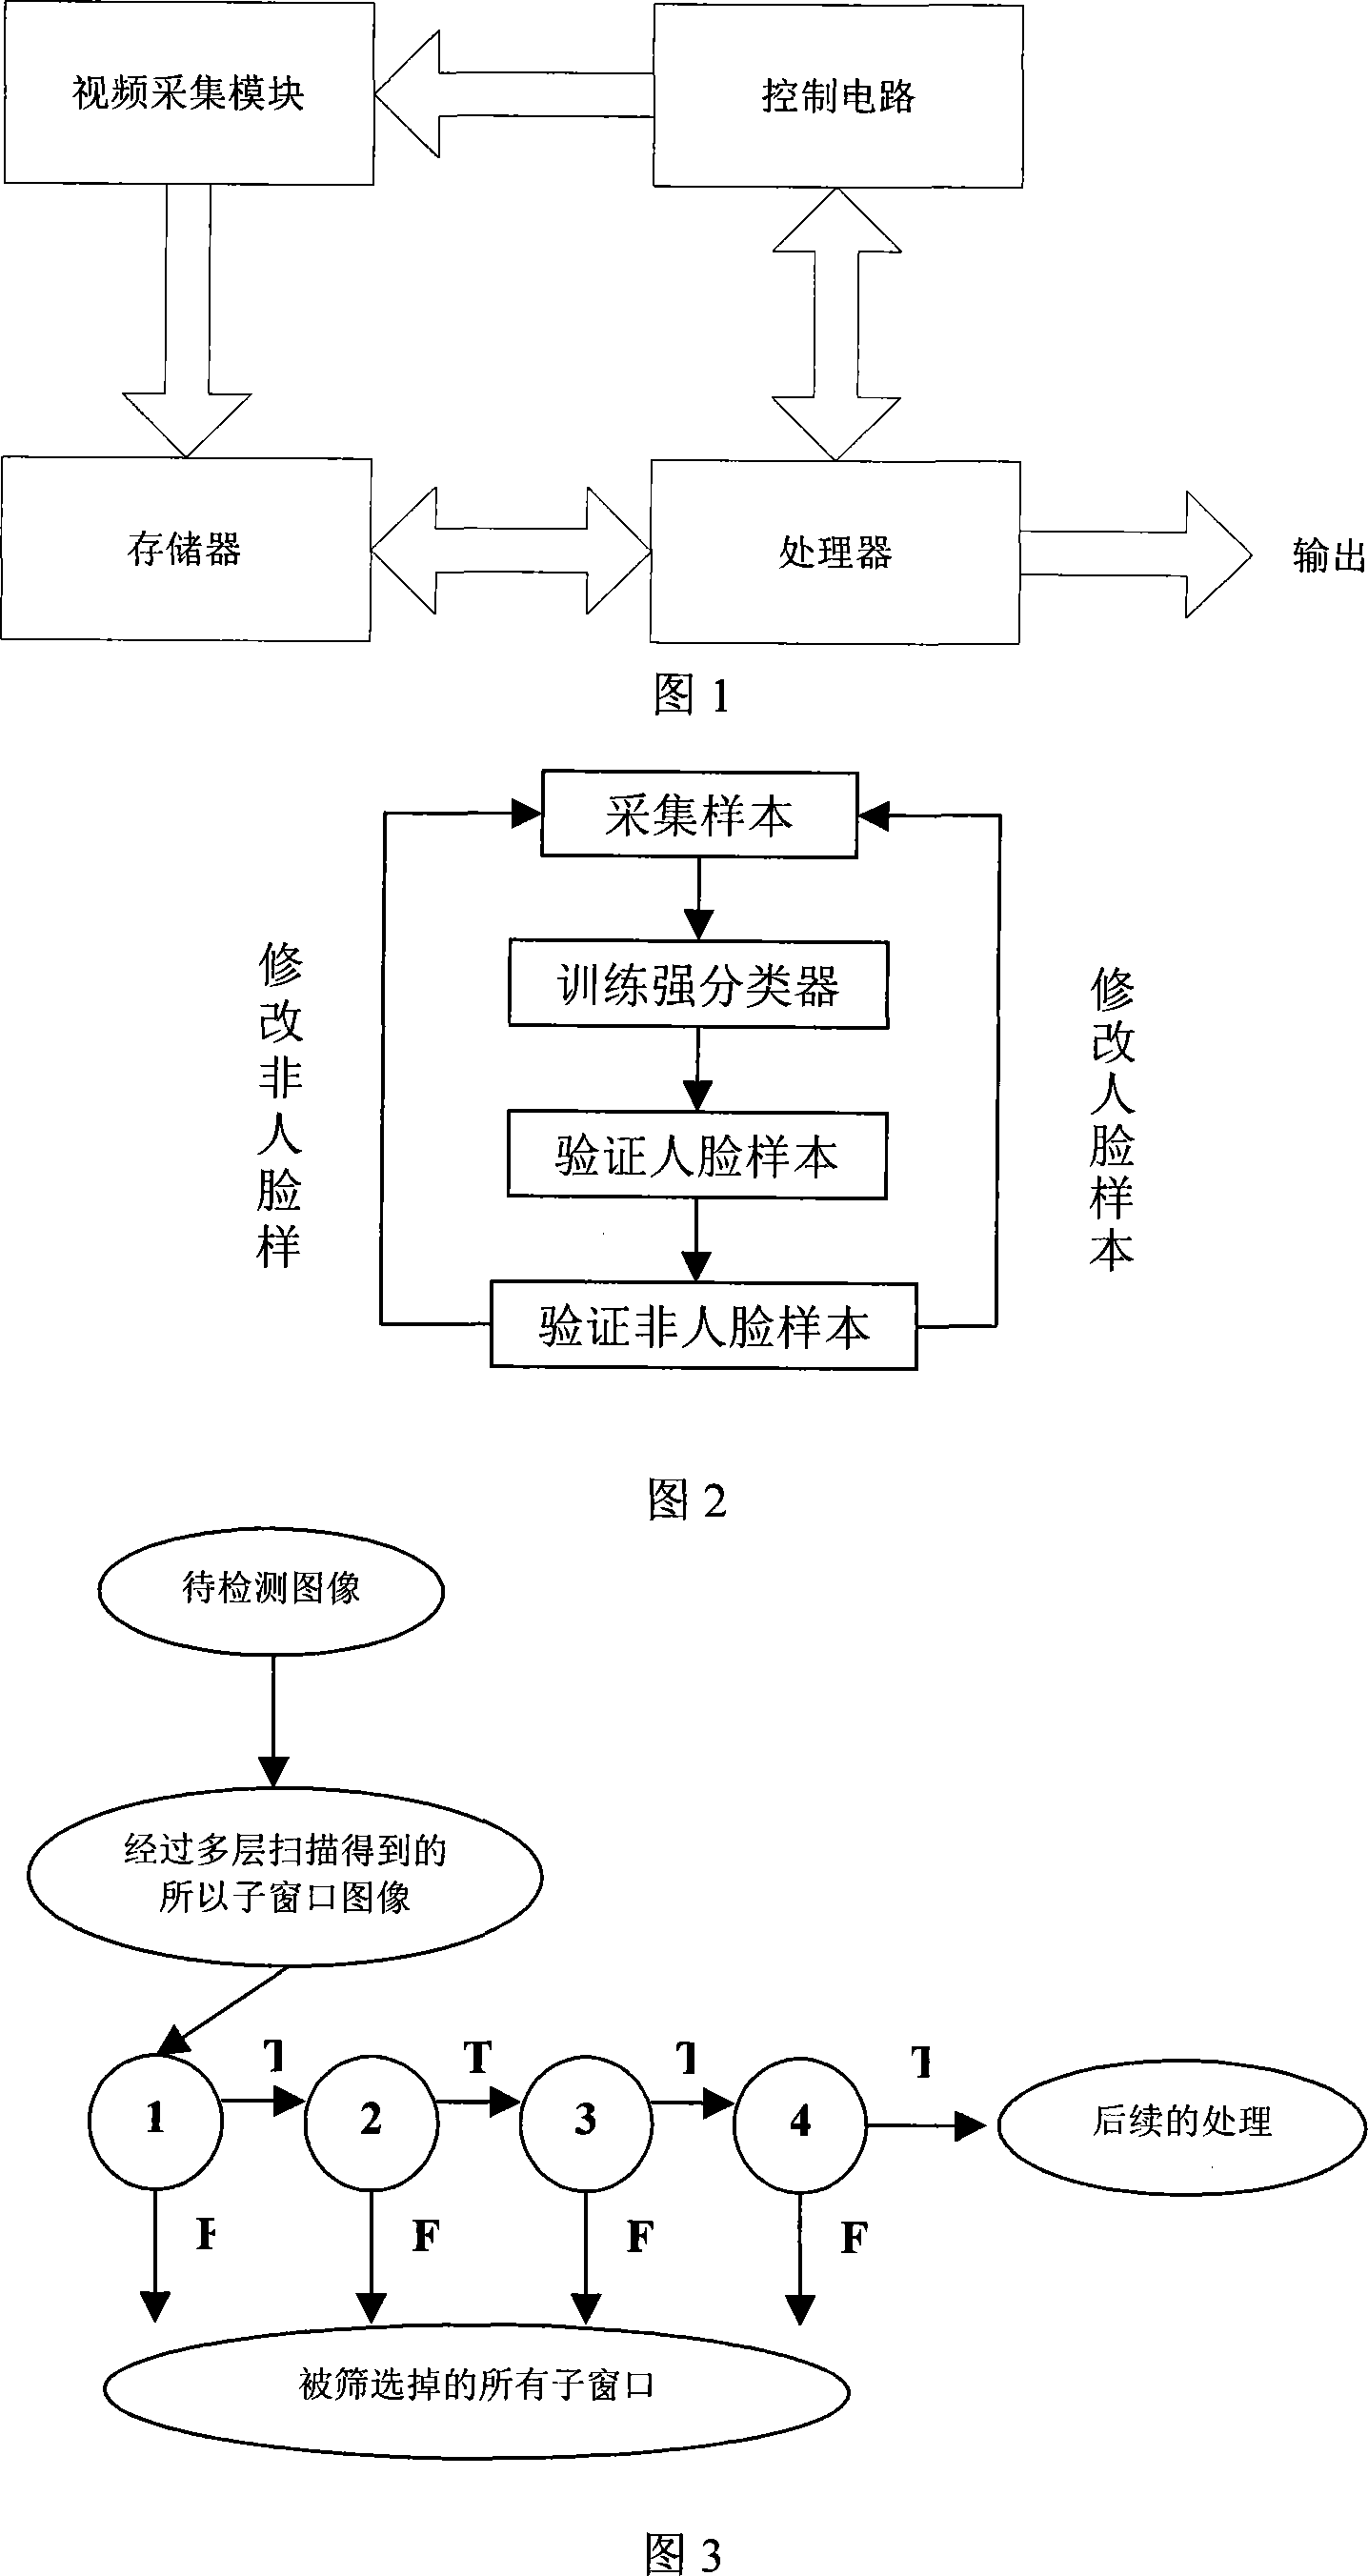 Close passenger traffic counting and passenger walking velocity automatic detection method and system thereof